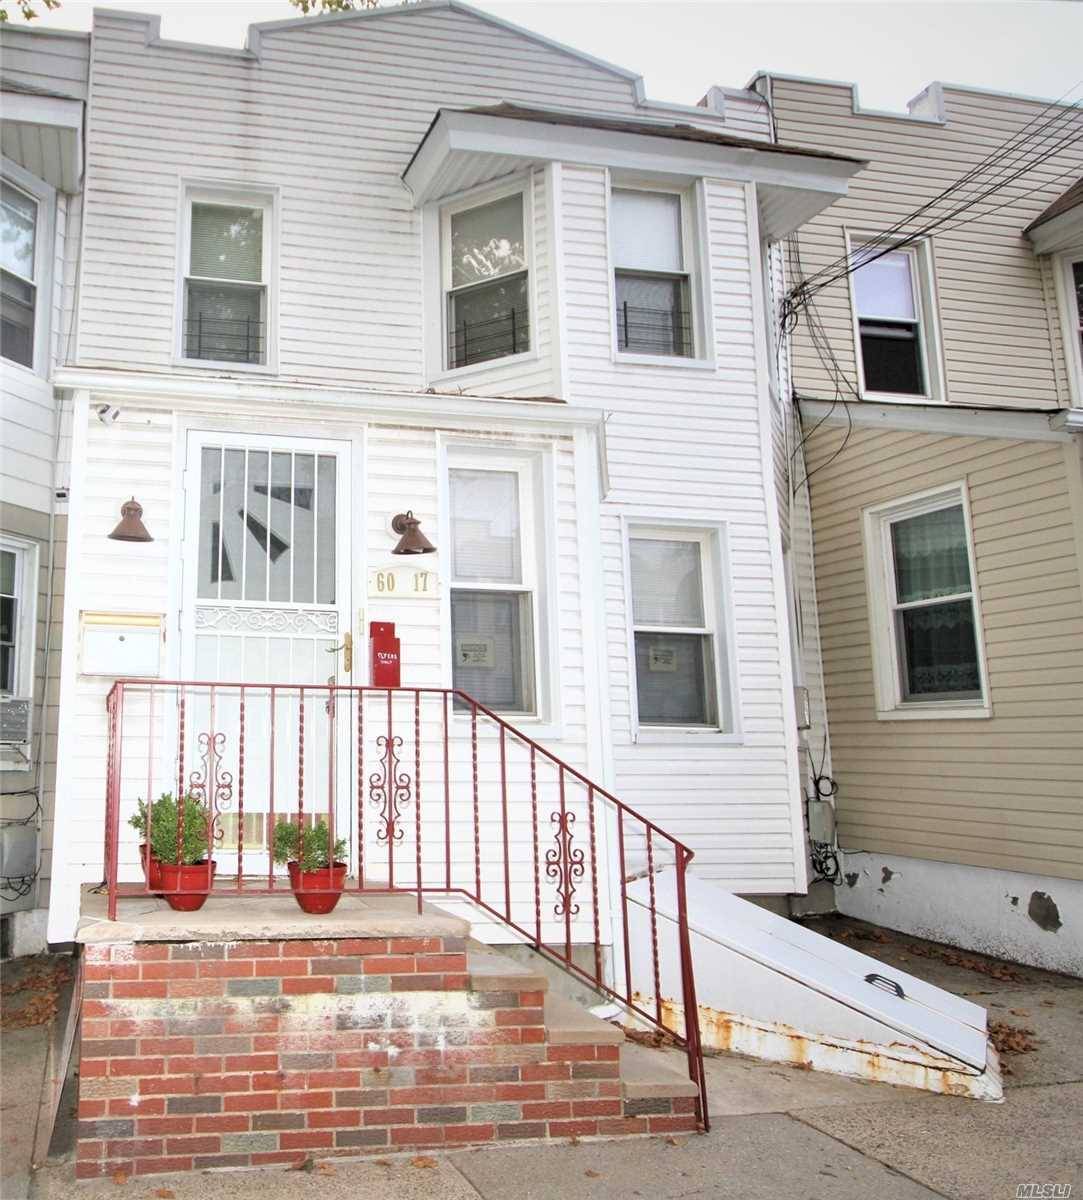 Attached, 2-Family Frame, 2-Story Home Featuring A 3-Bedroom Apt Over A 2-Bedroom Apt Over A Full Finished Basement.